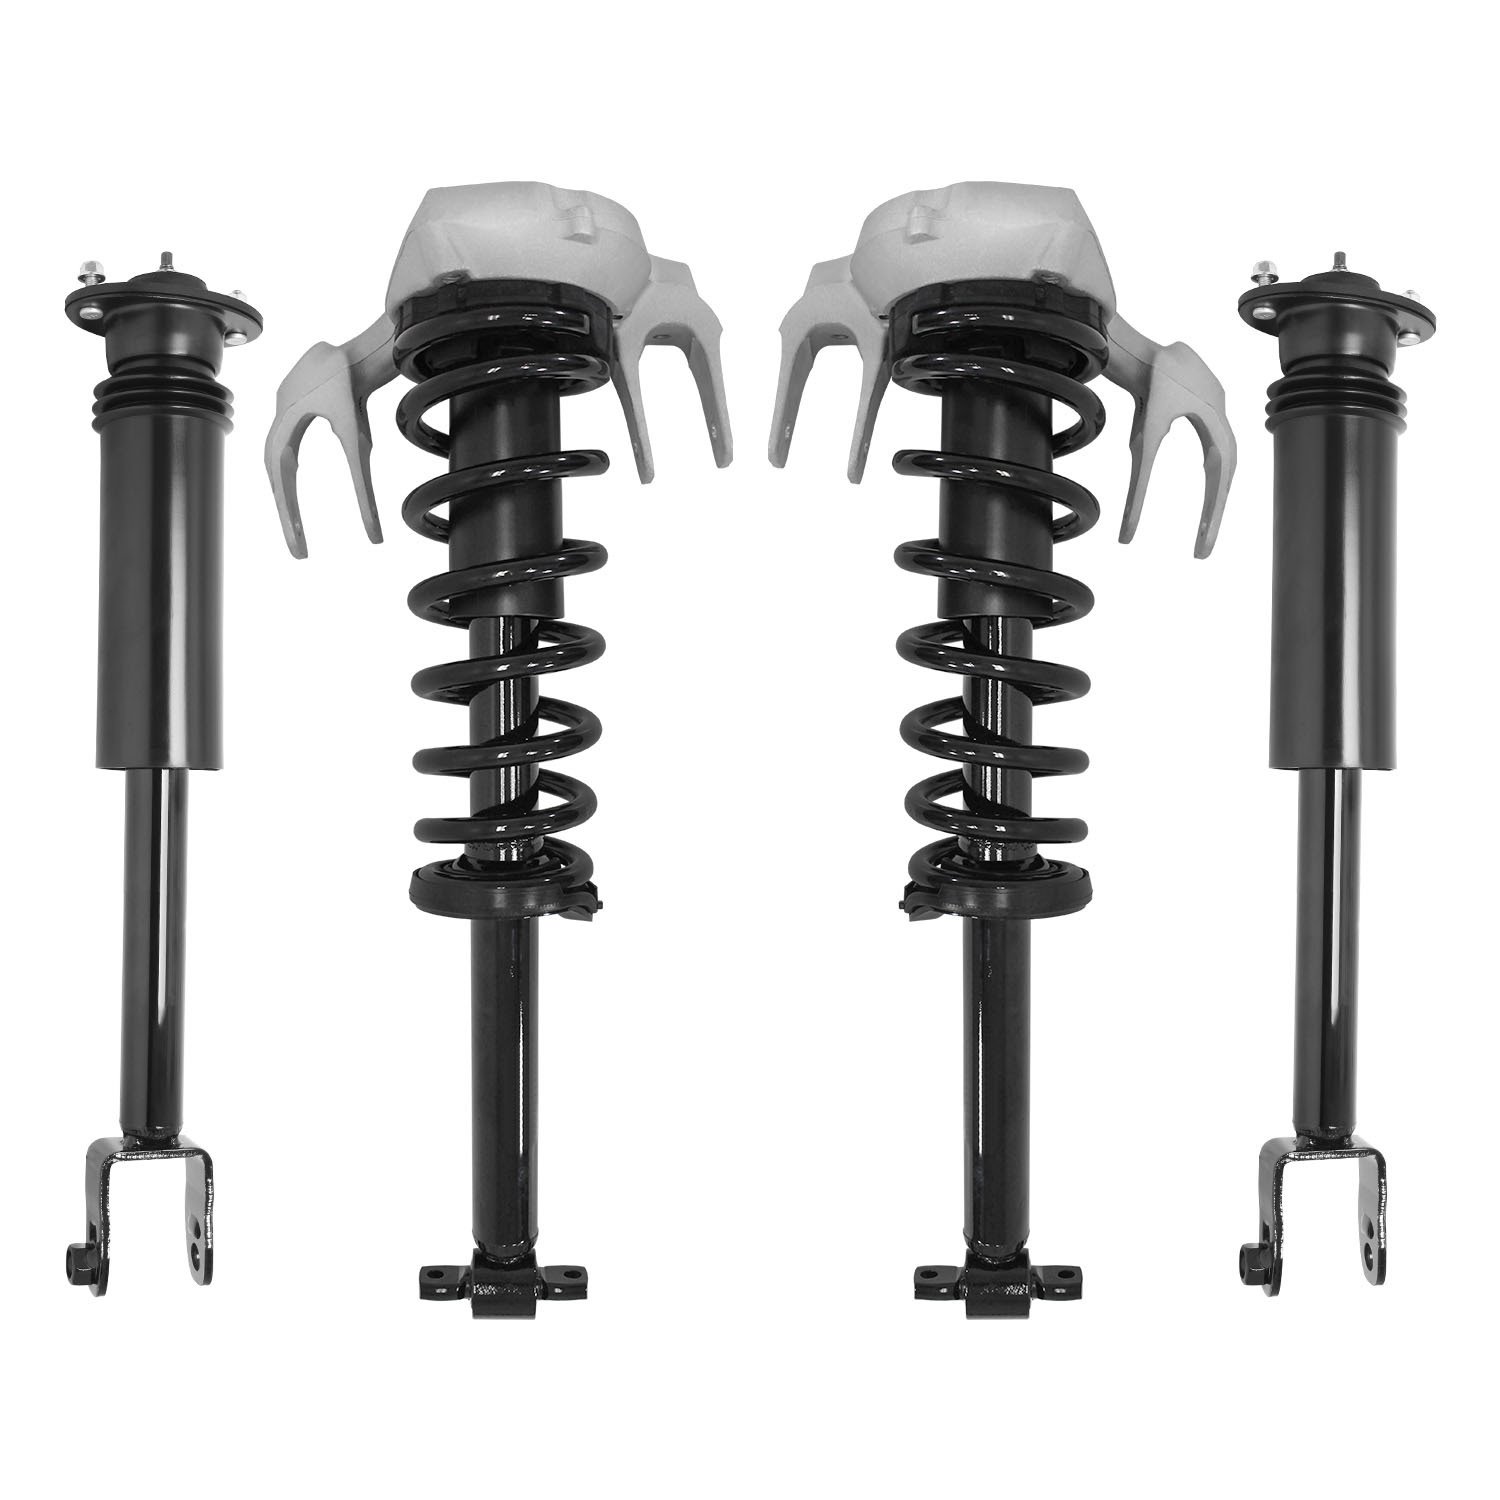 4-11703-251160-001 Front & Rear Suspension Strut & Coil Spring Assembly Fits Select Cadillac CTS